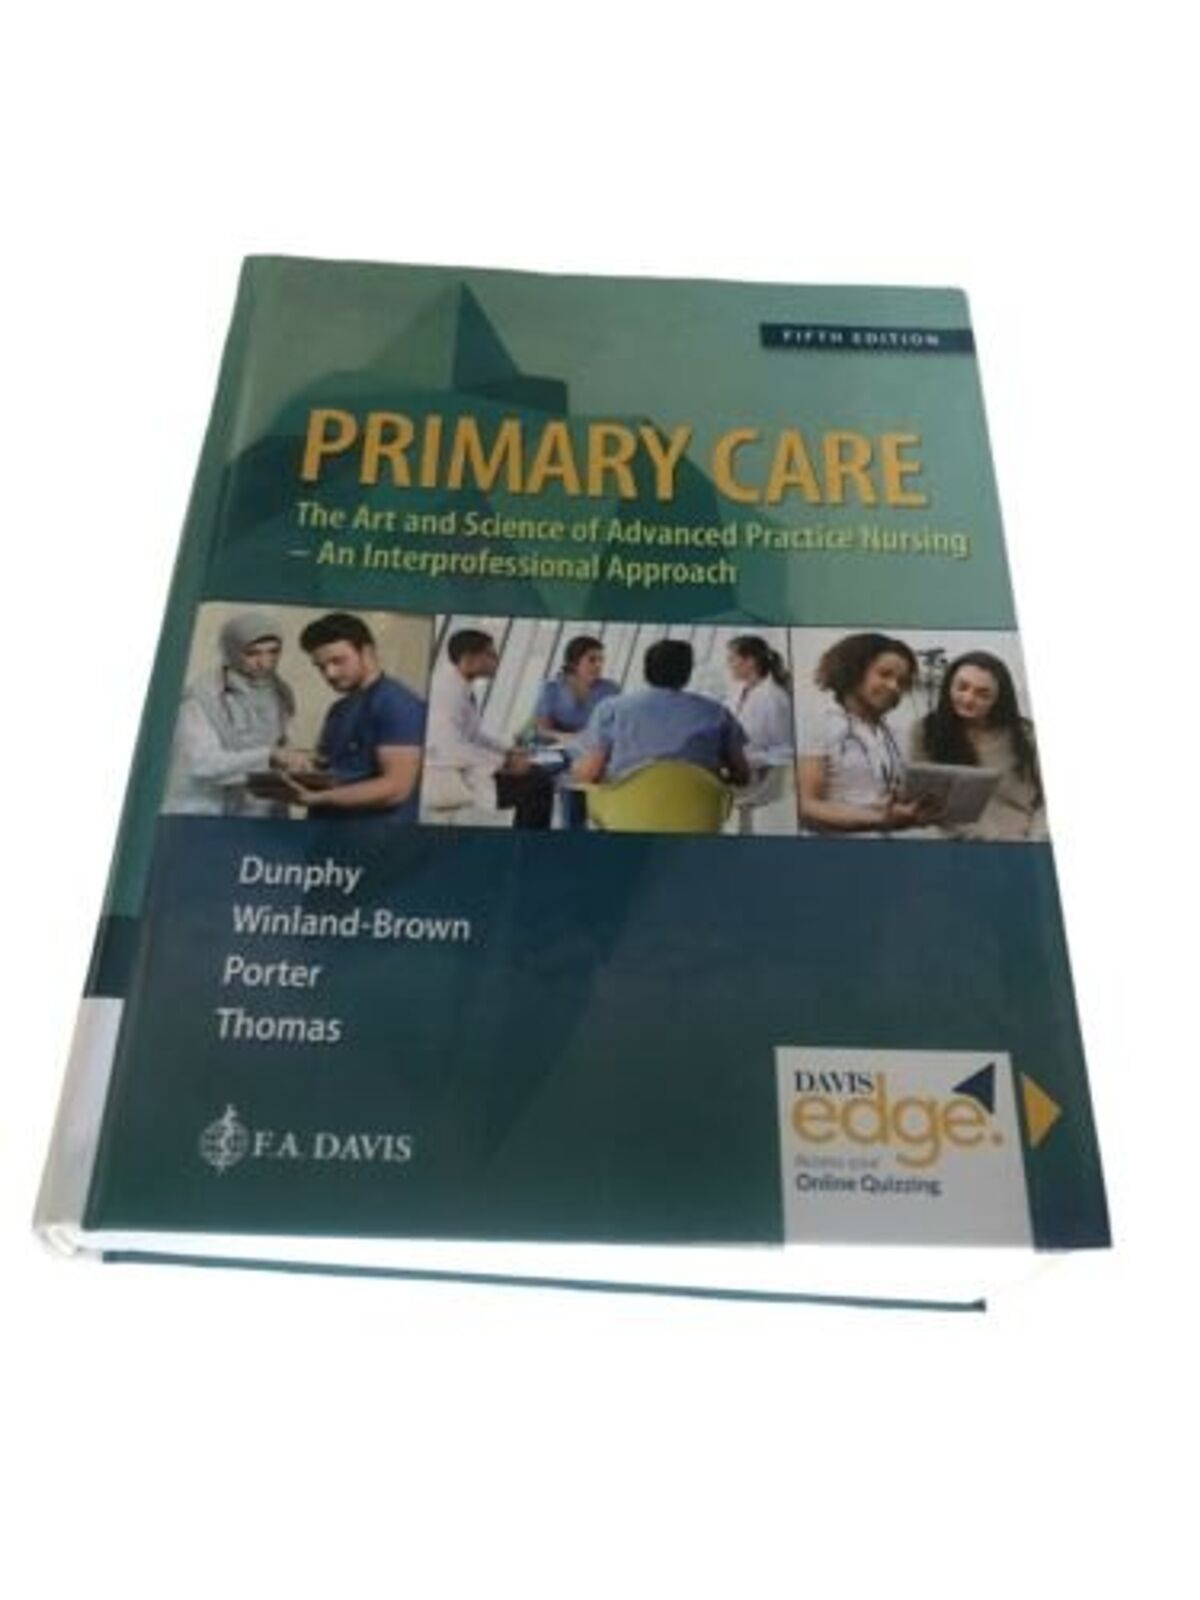 Primary Care: Art And Science Of Advanced Practice Nursing - Hardcover - Good